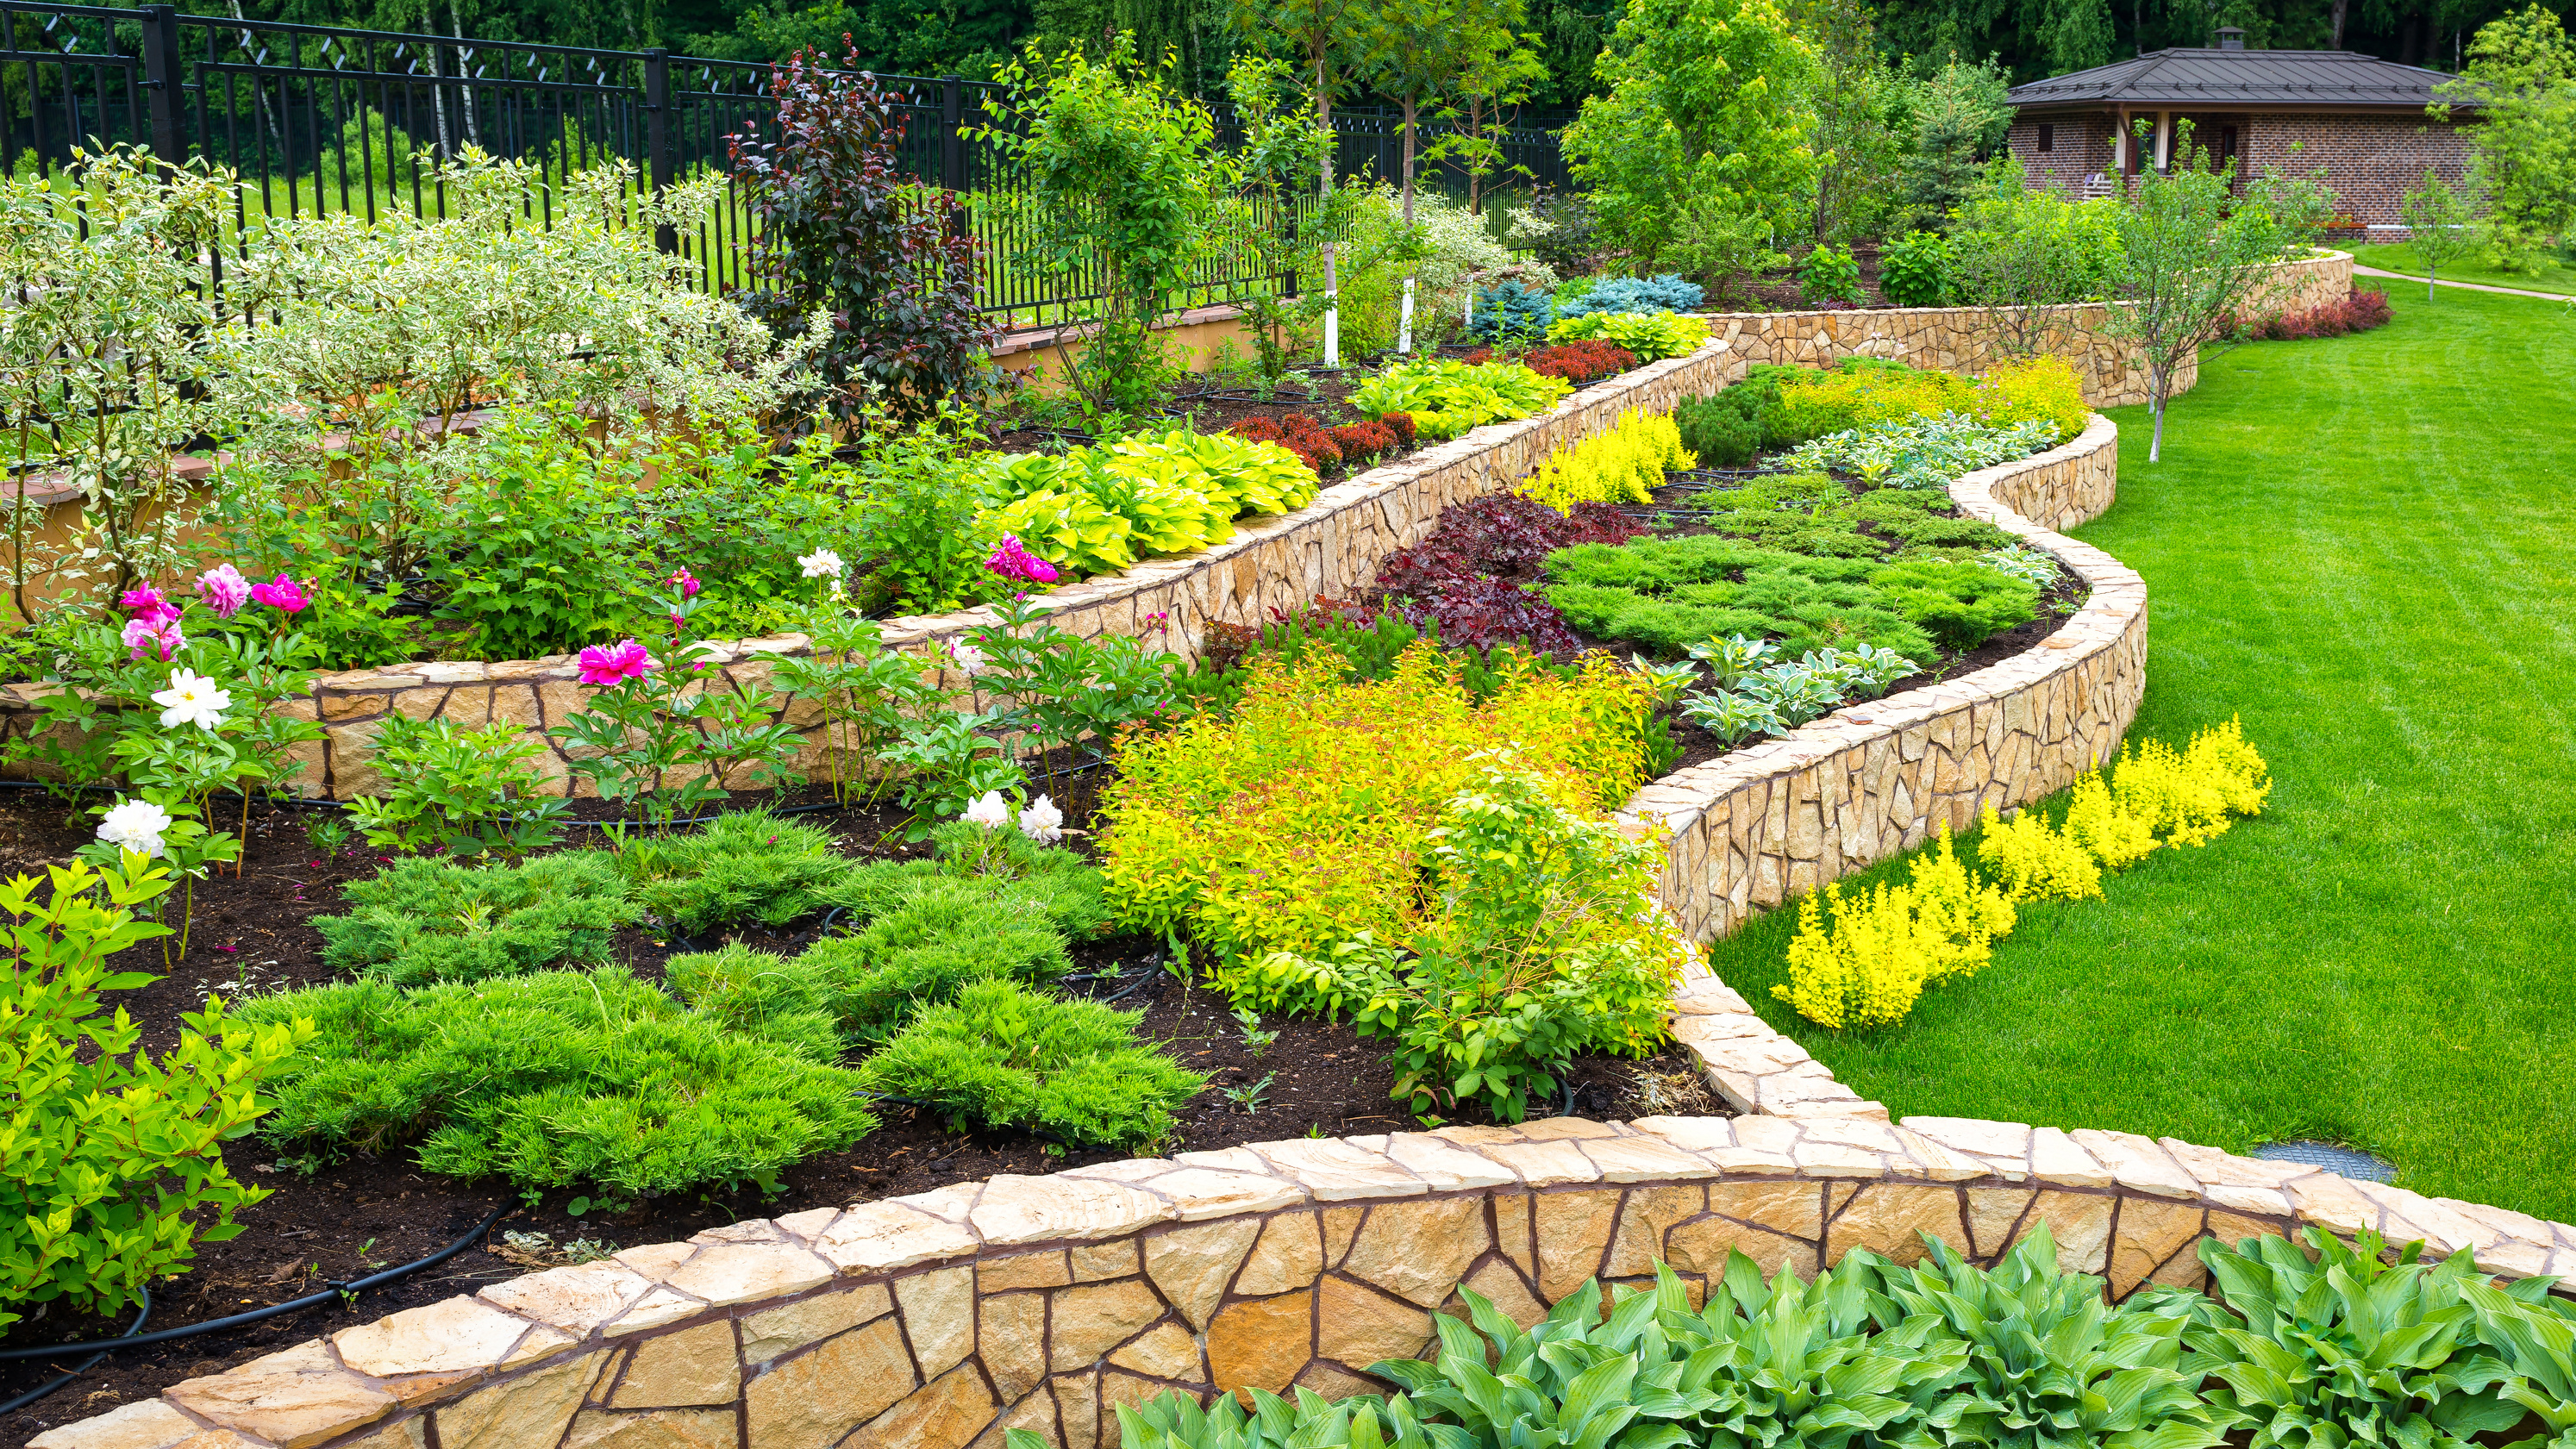 Landscaping panorama of home garden. Landscape design with plants, flowers and stone in backyard.